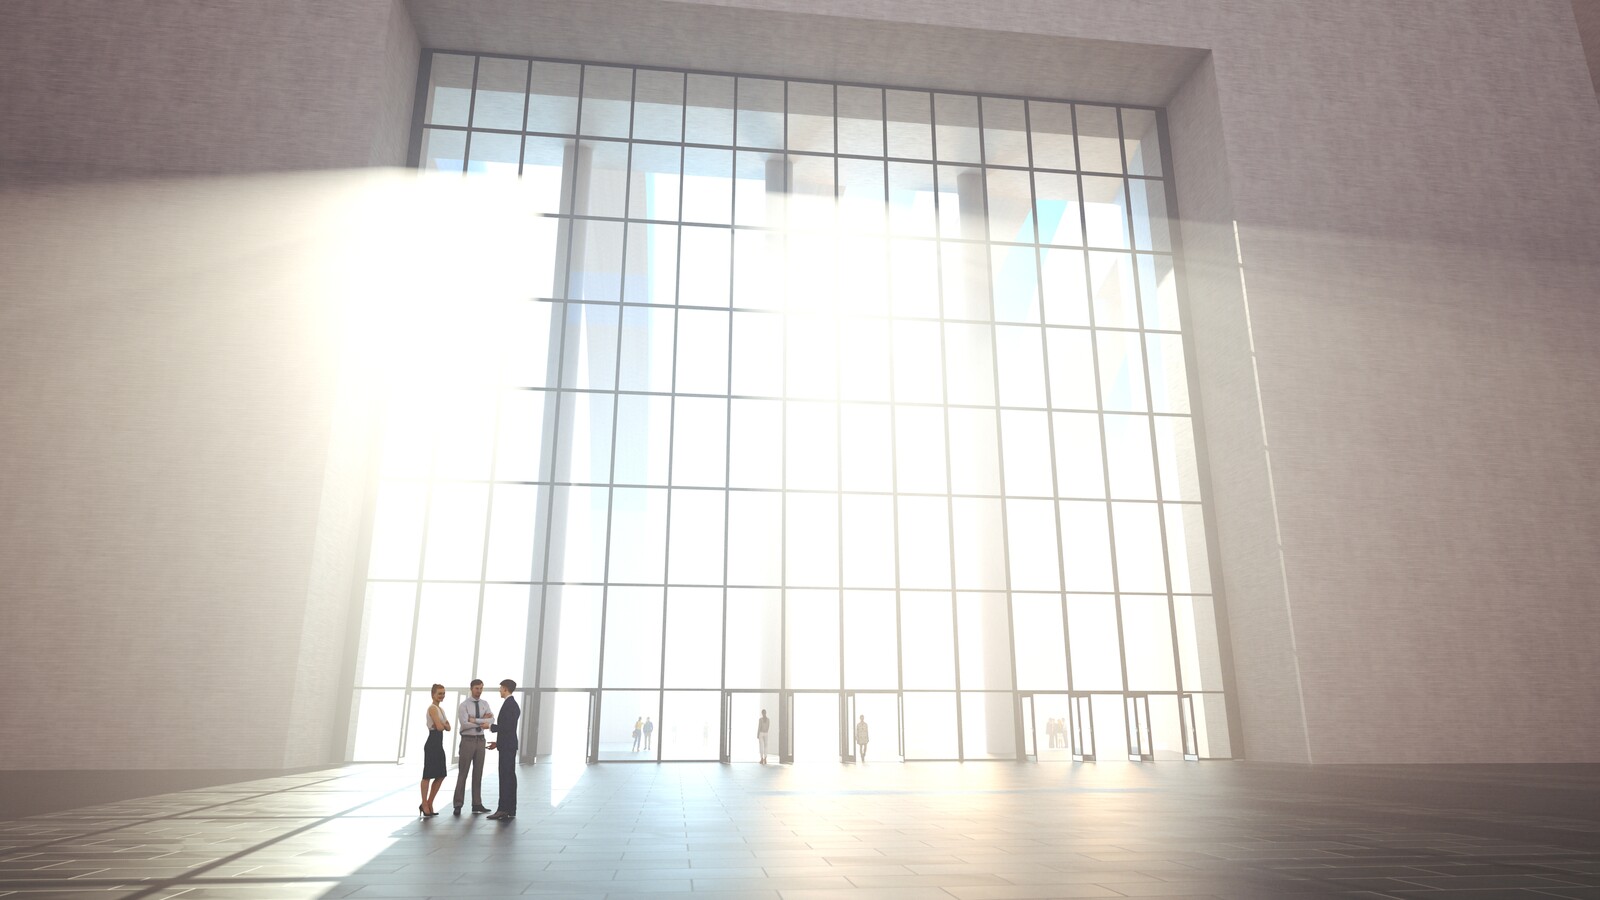 SketchUp 2019 + Thea Render 
Large Hall Main Entry_SU8 2018-Scene 8 Emitter 3840x2160 49m40s 1024 sp 02